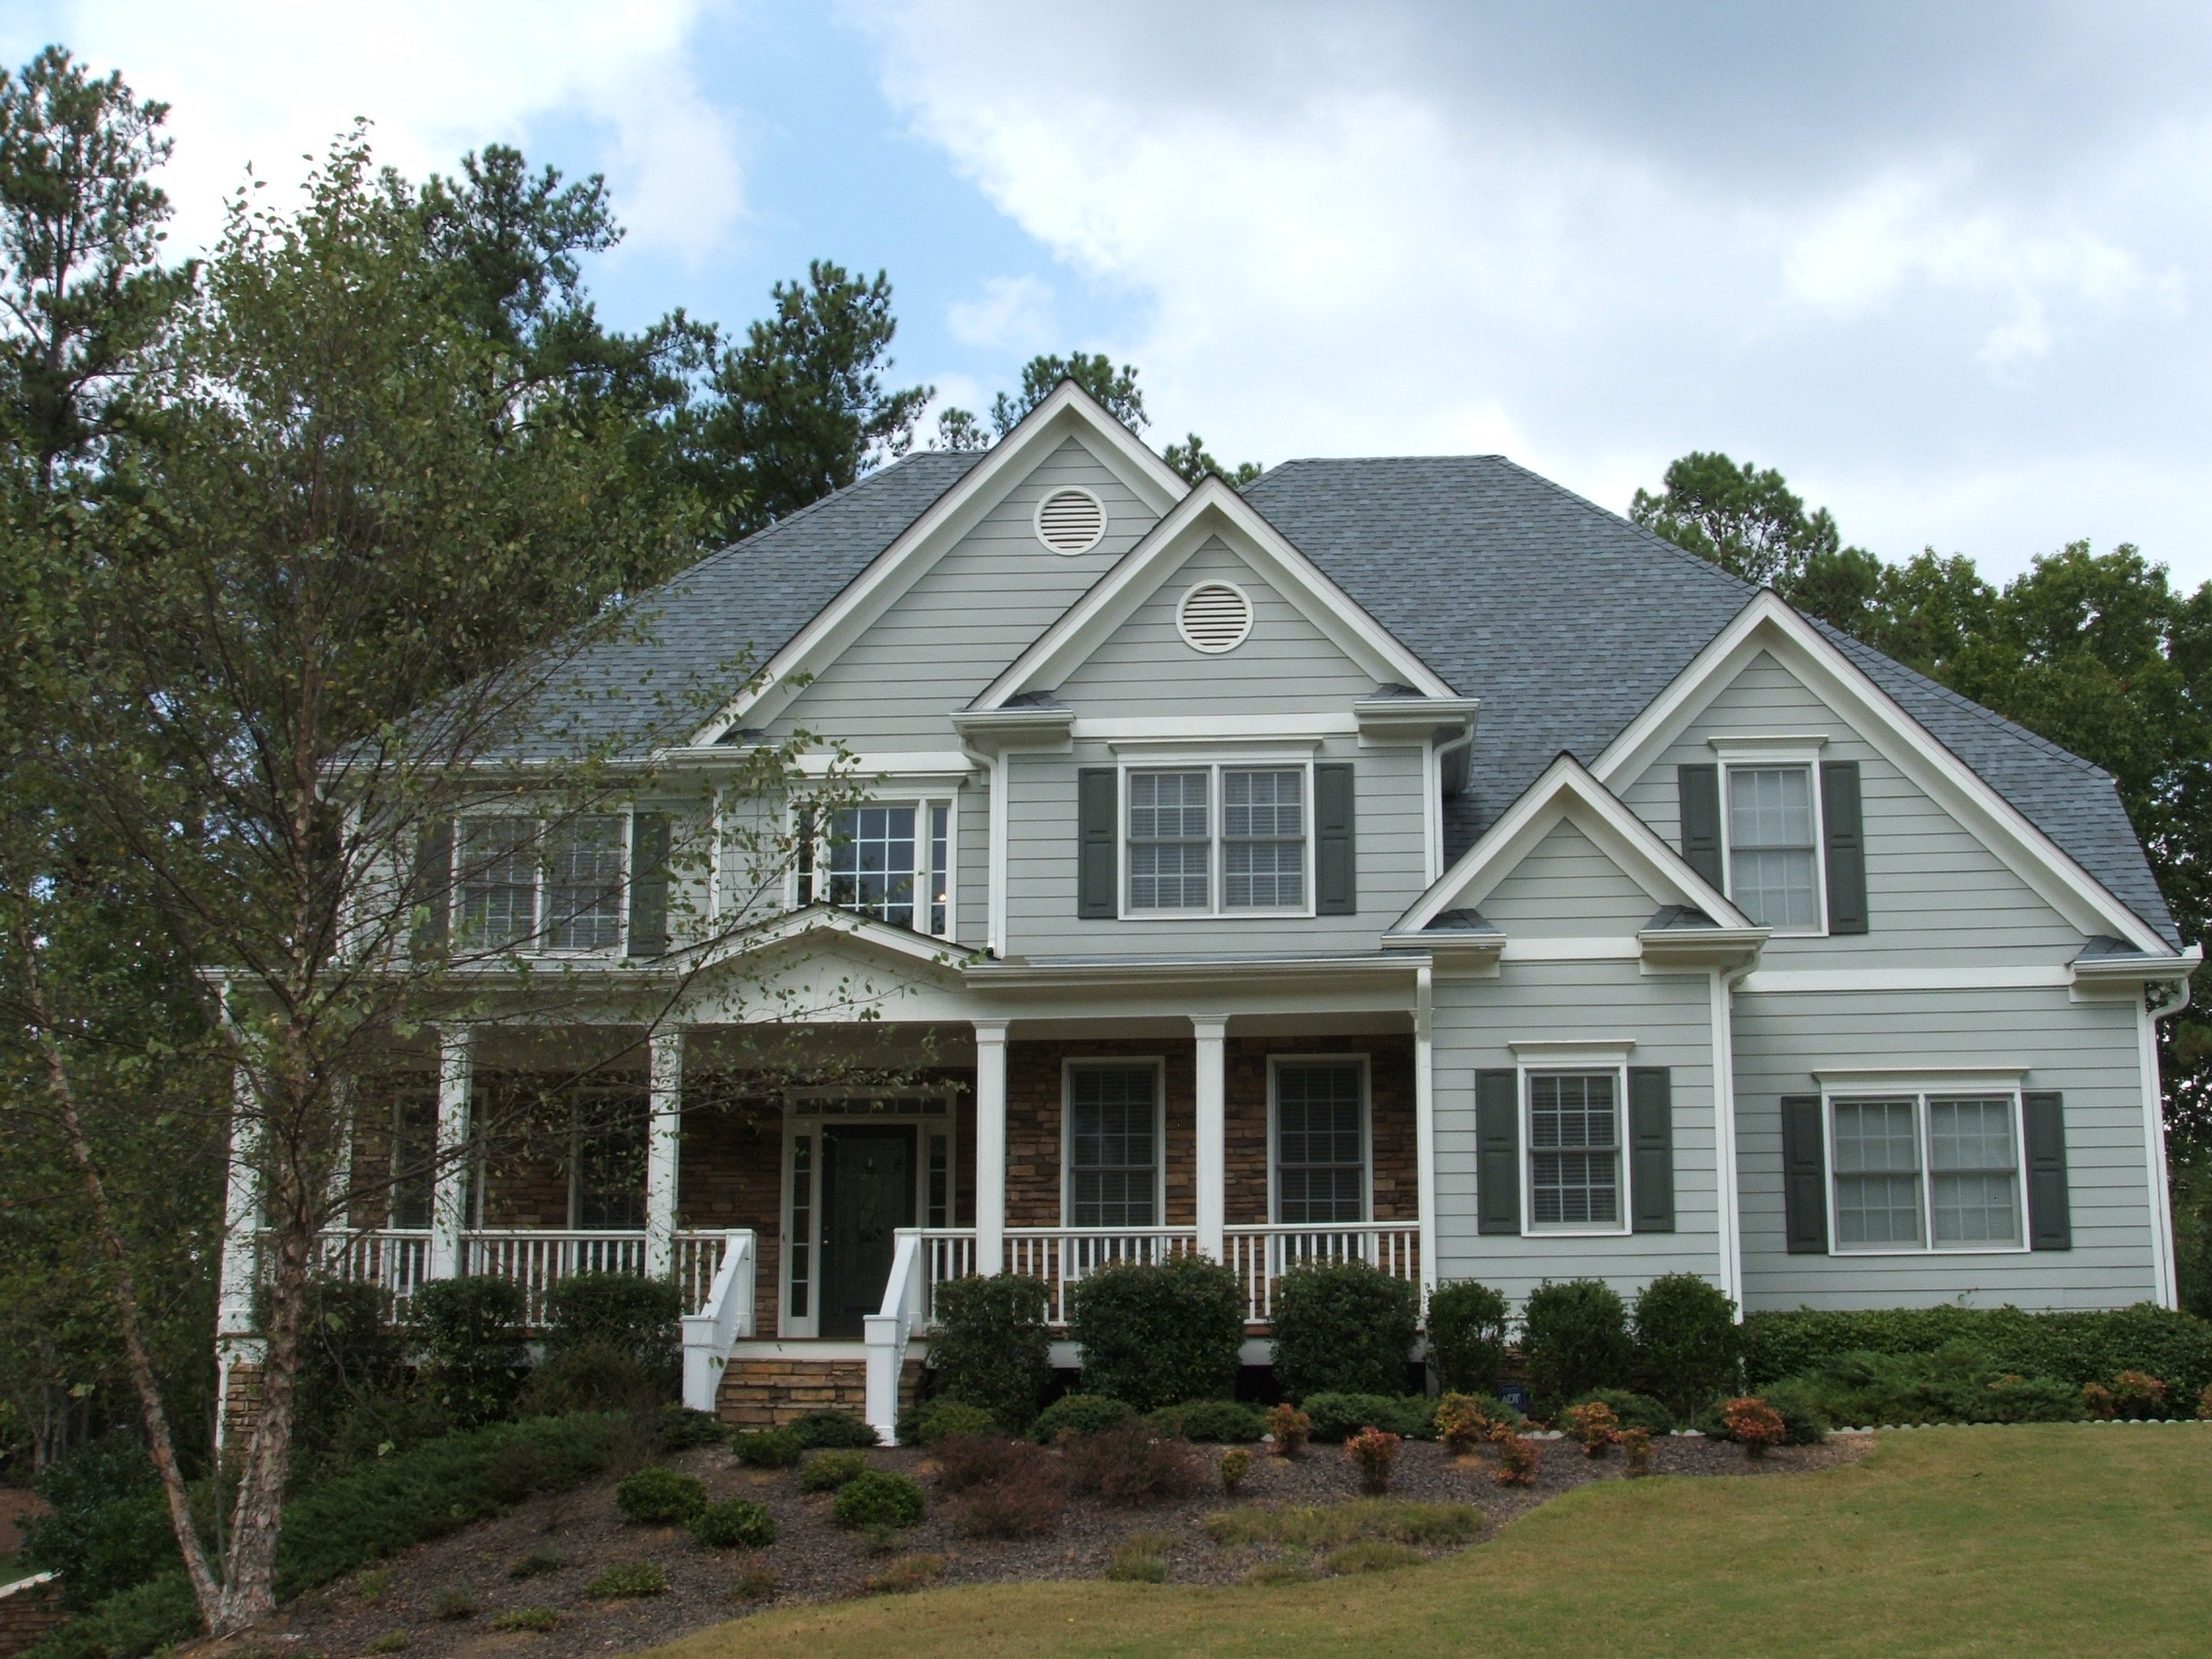 owens corning estate gray pictures - Google Search | For the Home ...